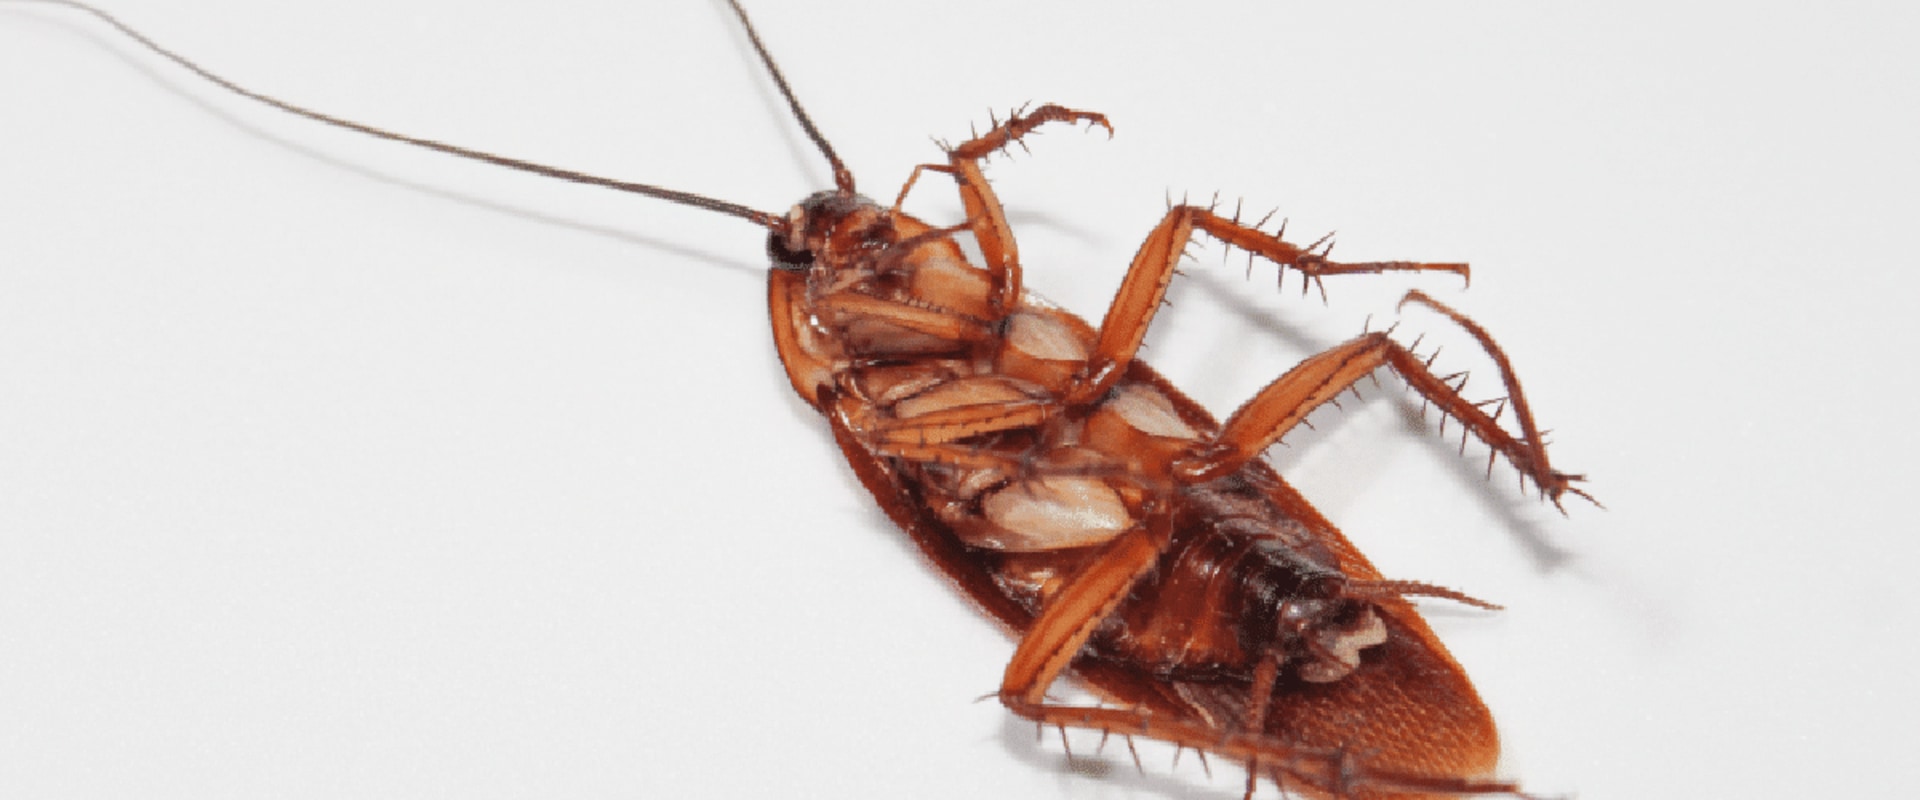 How long does it take for an exterminator to get rid of roaches?